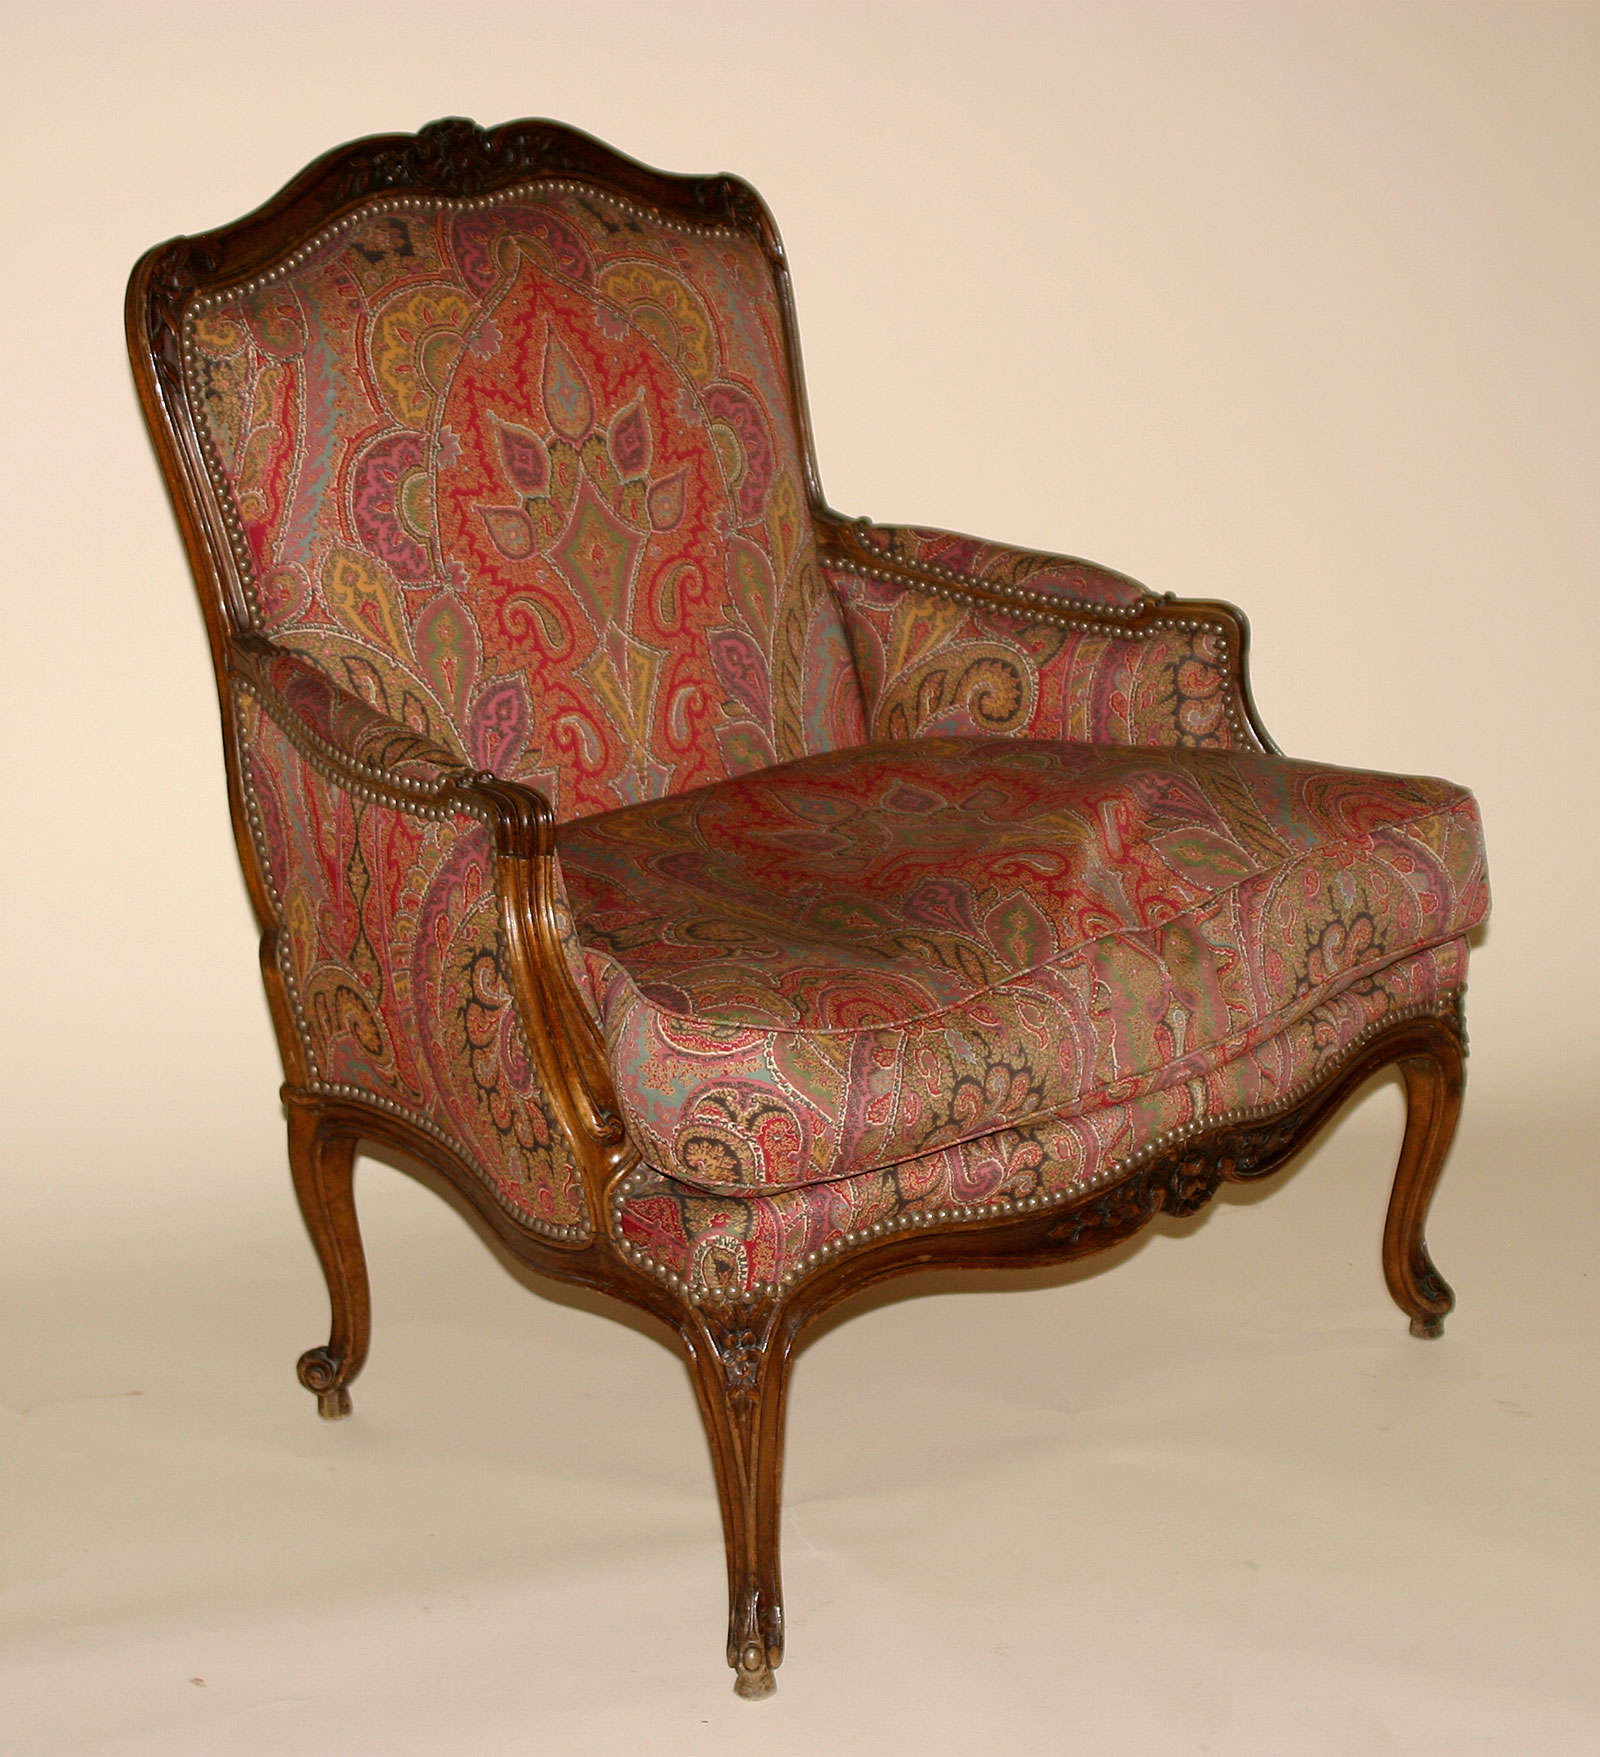 Pair of French, Provincial, Louis XV style bergeres